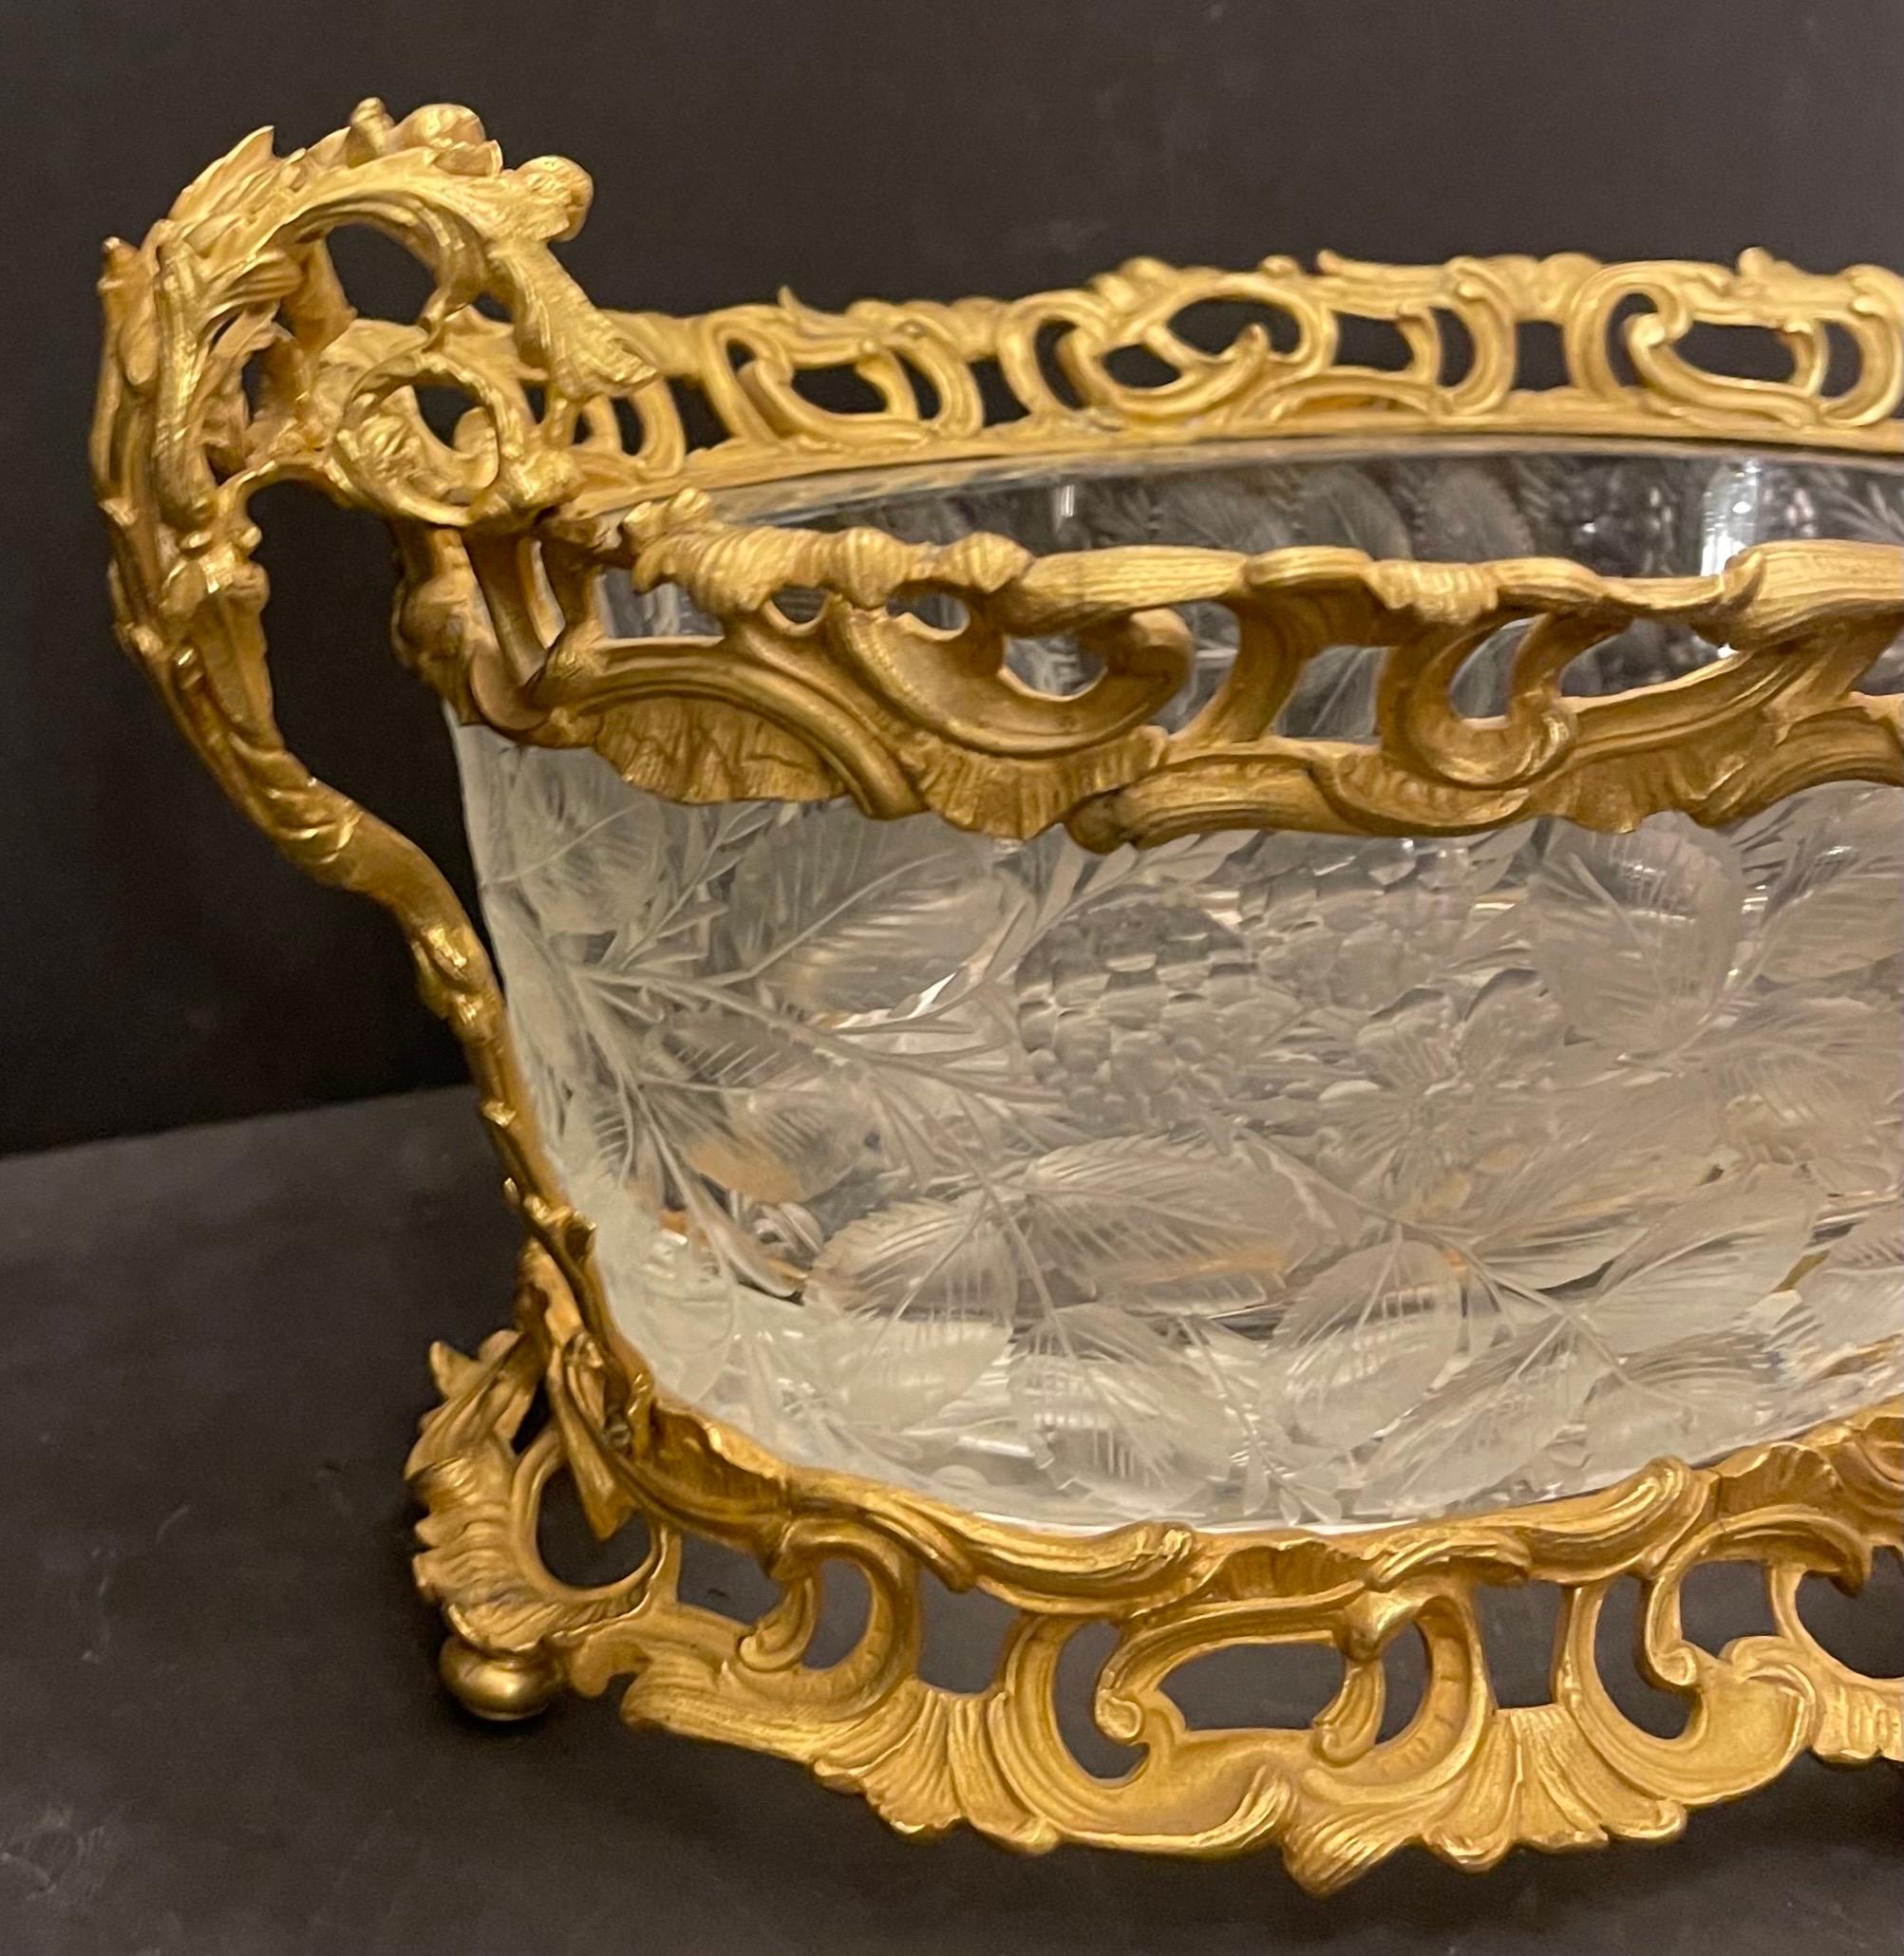 A Wonderful French Dore Bronze Ormolu And Etched Crystal Oval Centerpiece Signed Les Mures / Robert With Outstanding Detail In Casting And Etching, In The Manner Of Baccarat.